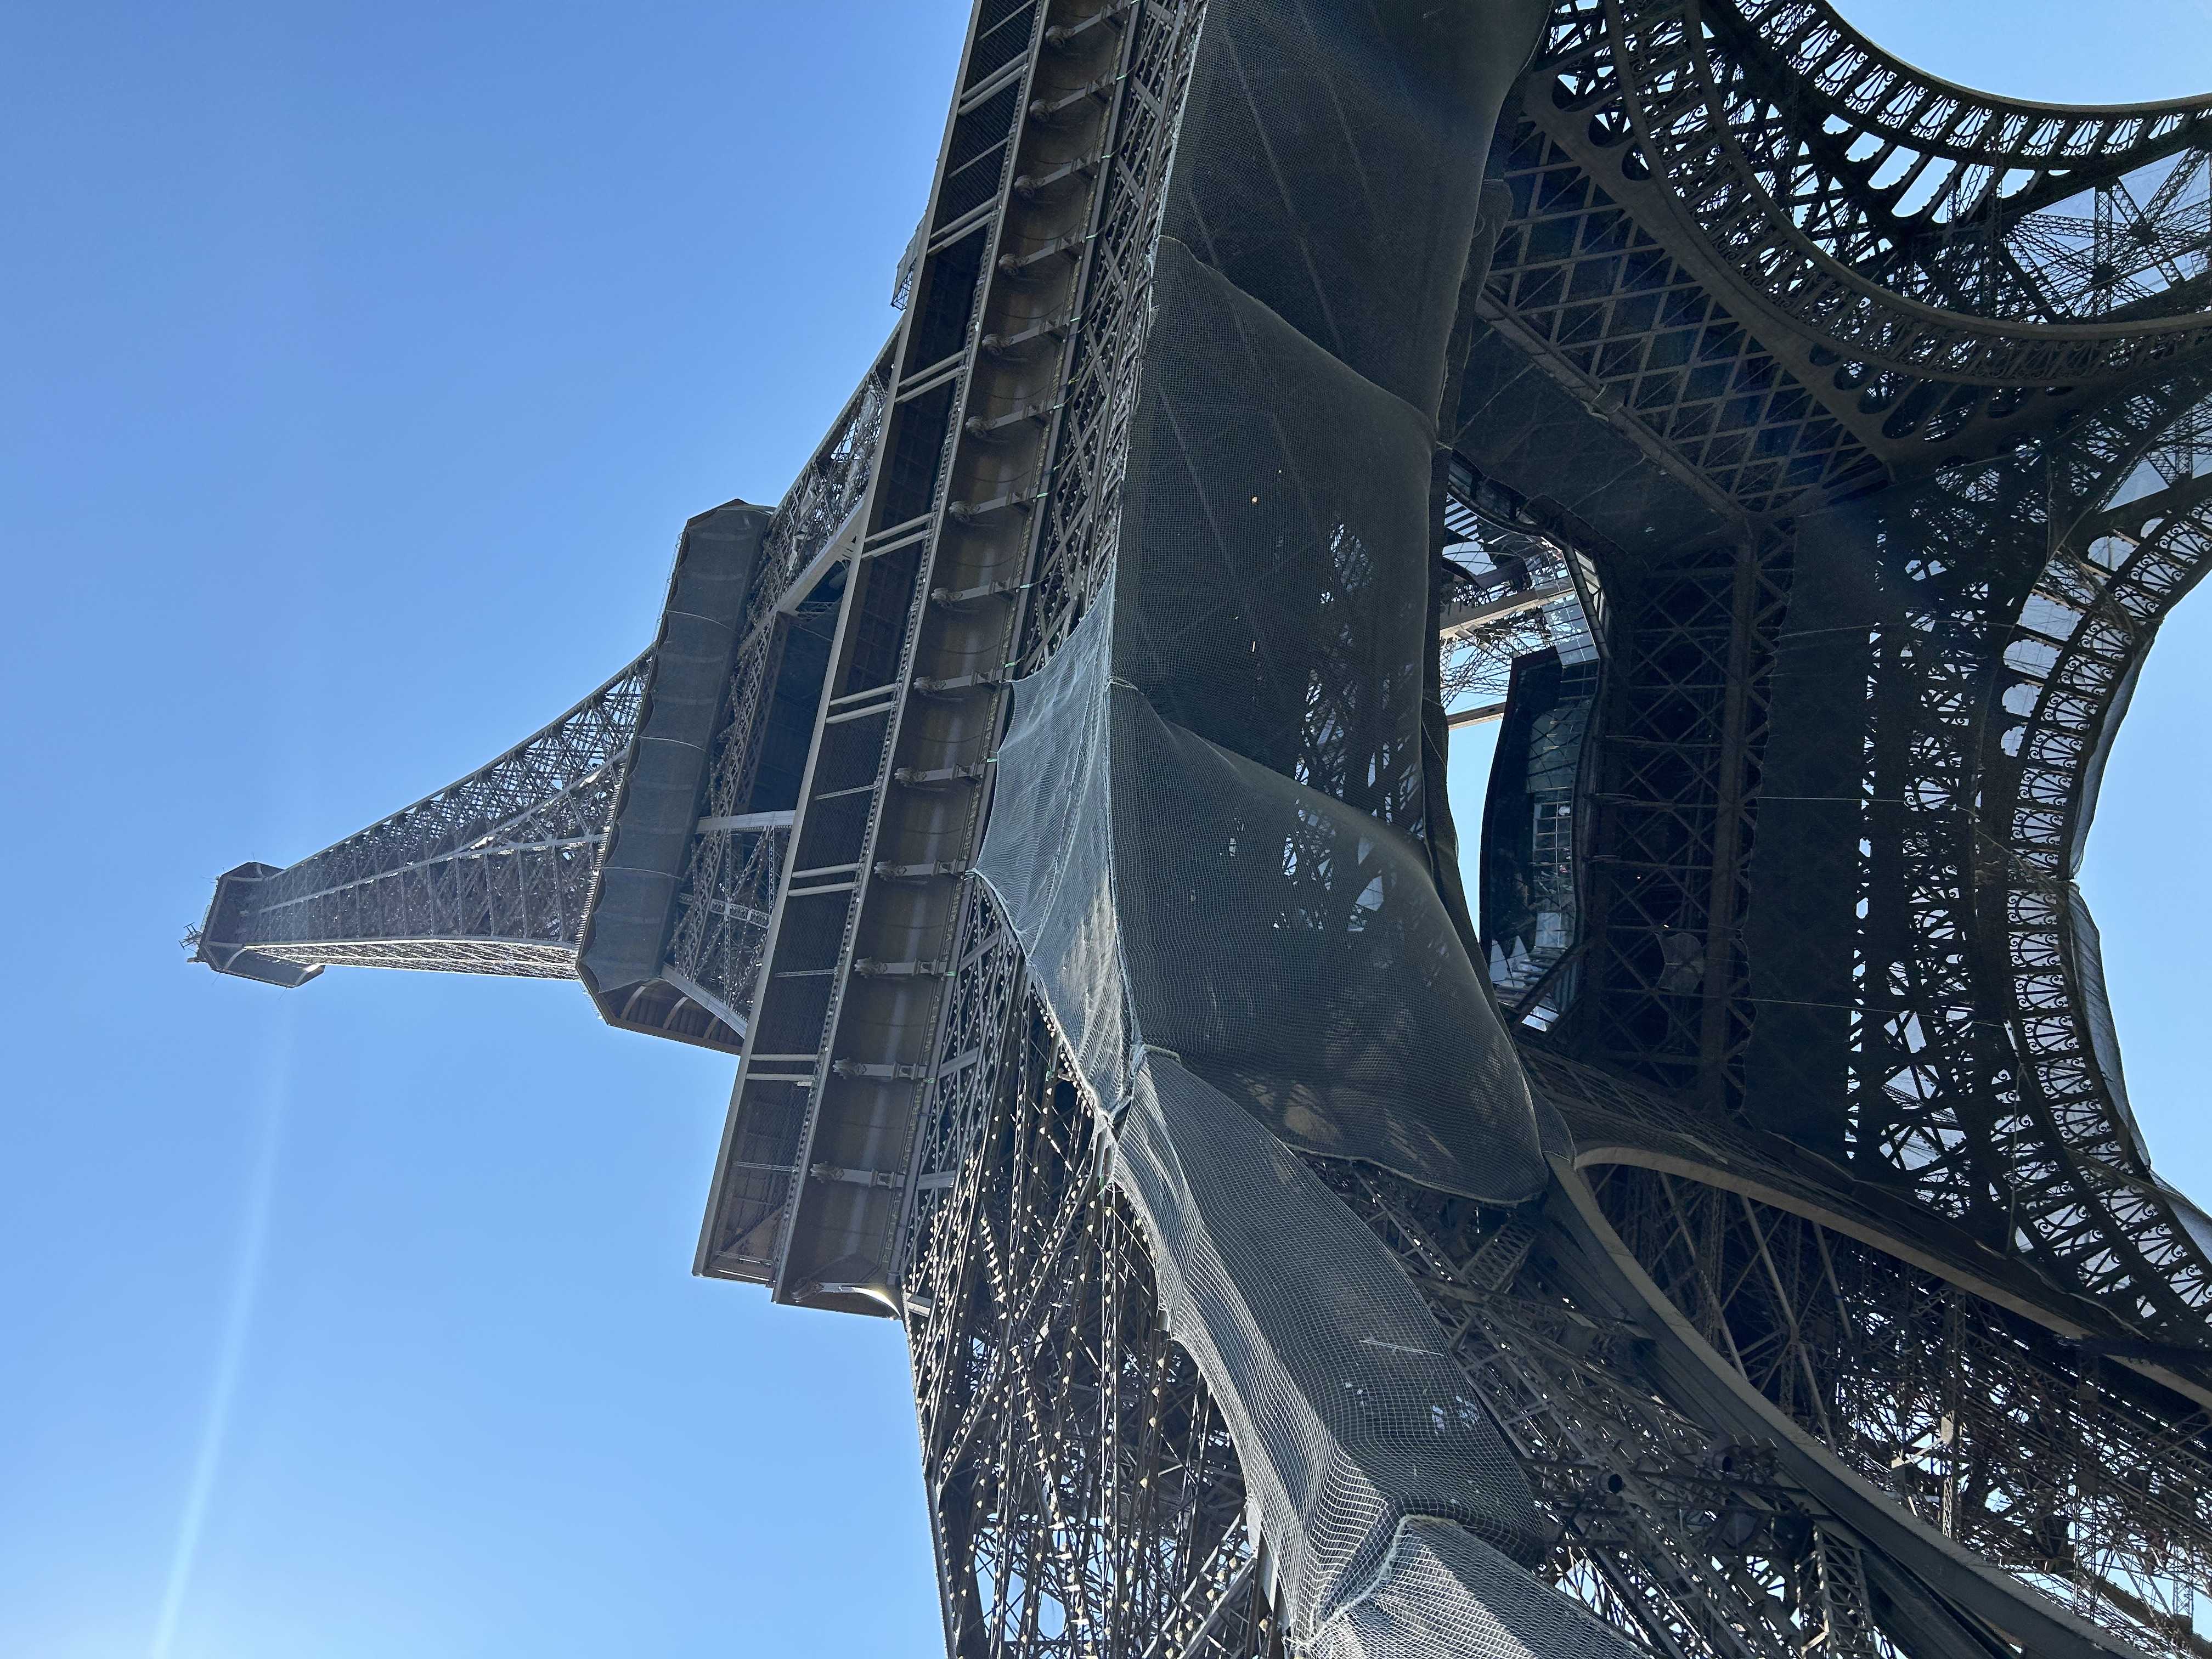 Photo of the Eiffel Tower from below.